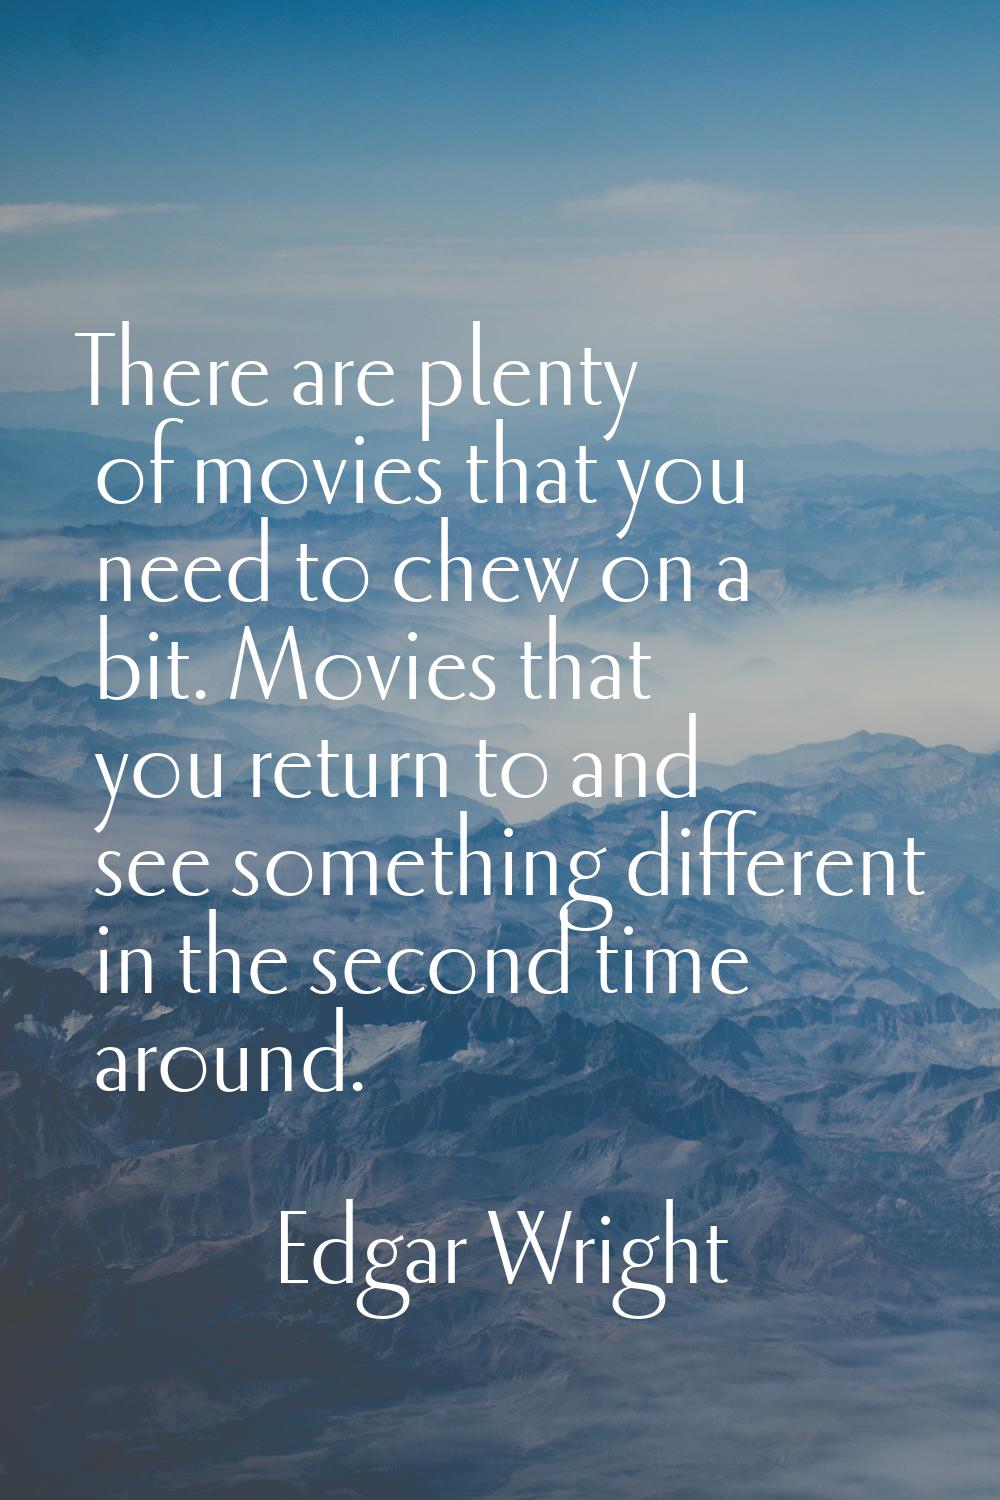 There are plenty of movies that you need to chew on a bit. Movies that you return to and see someth